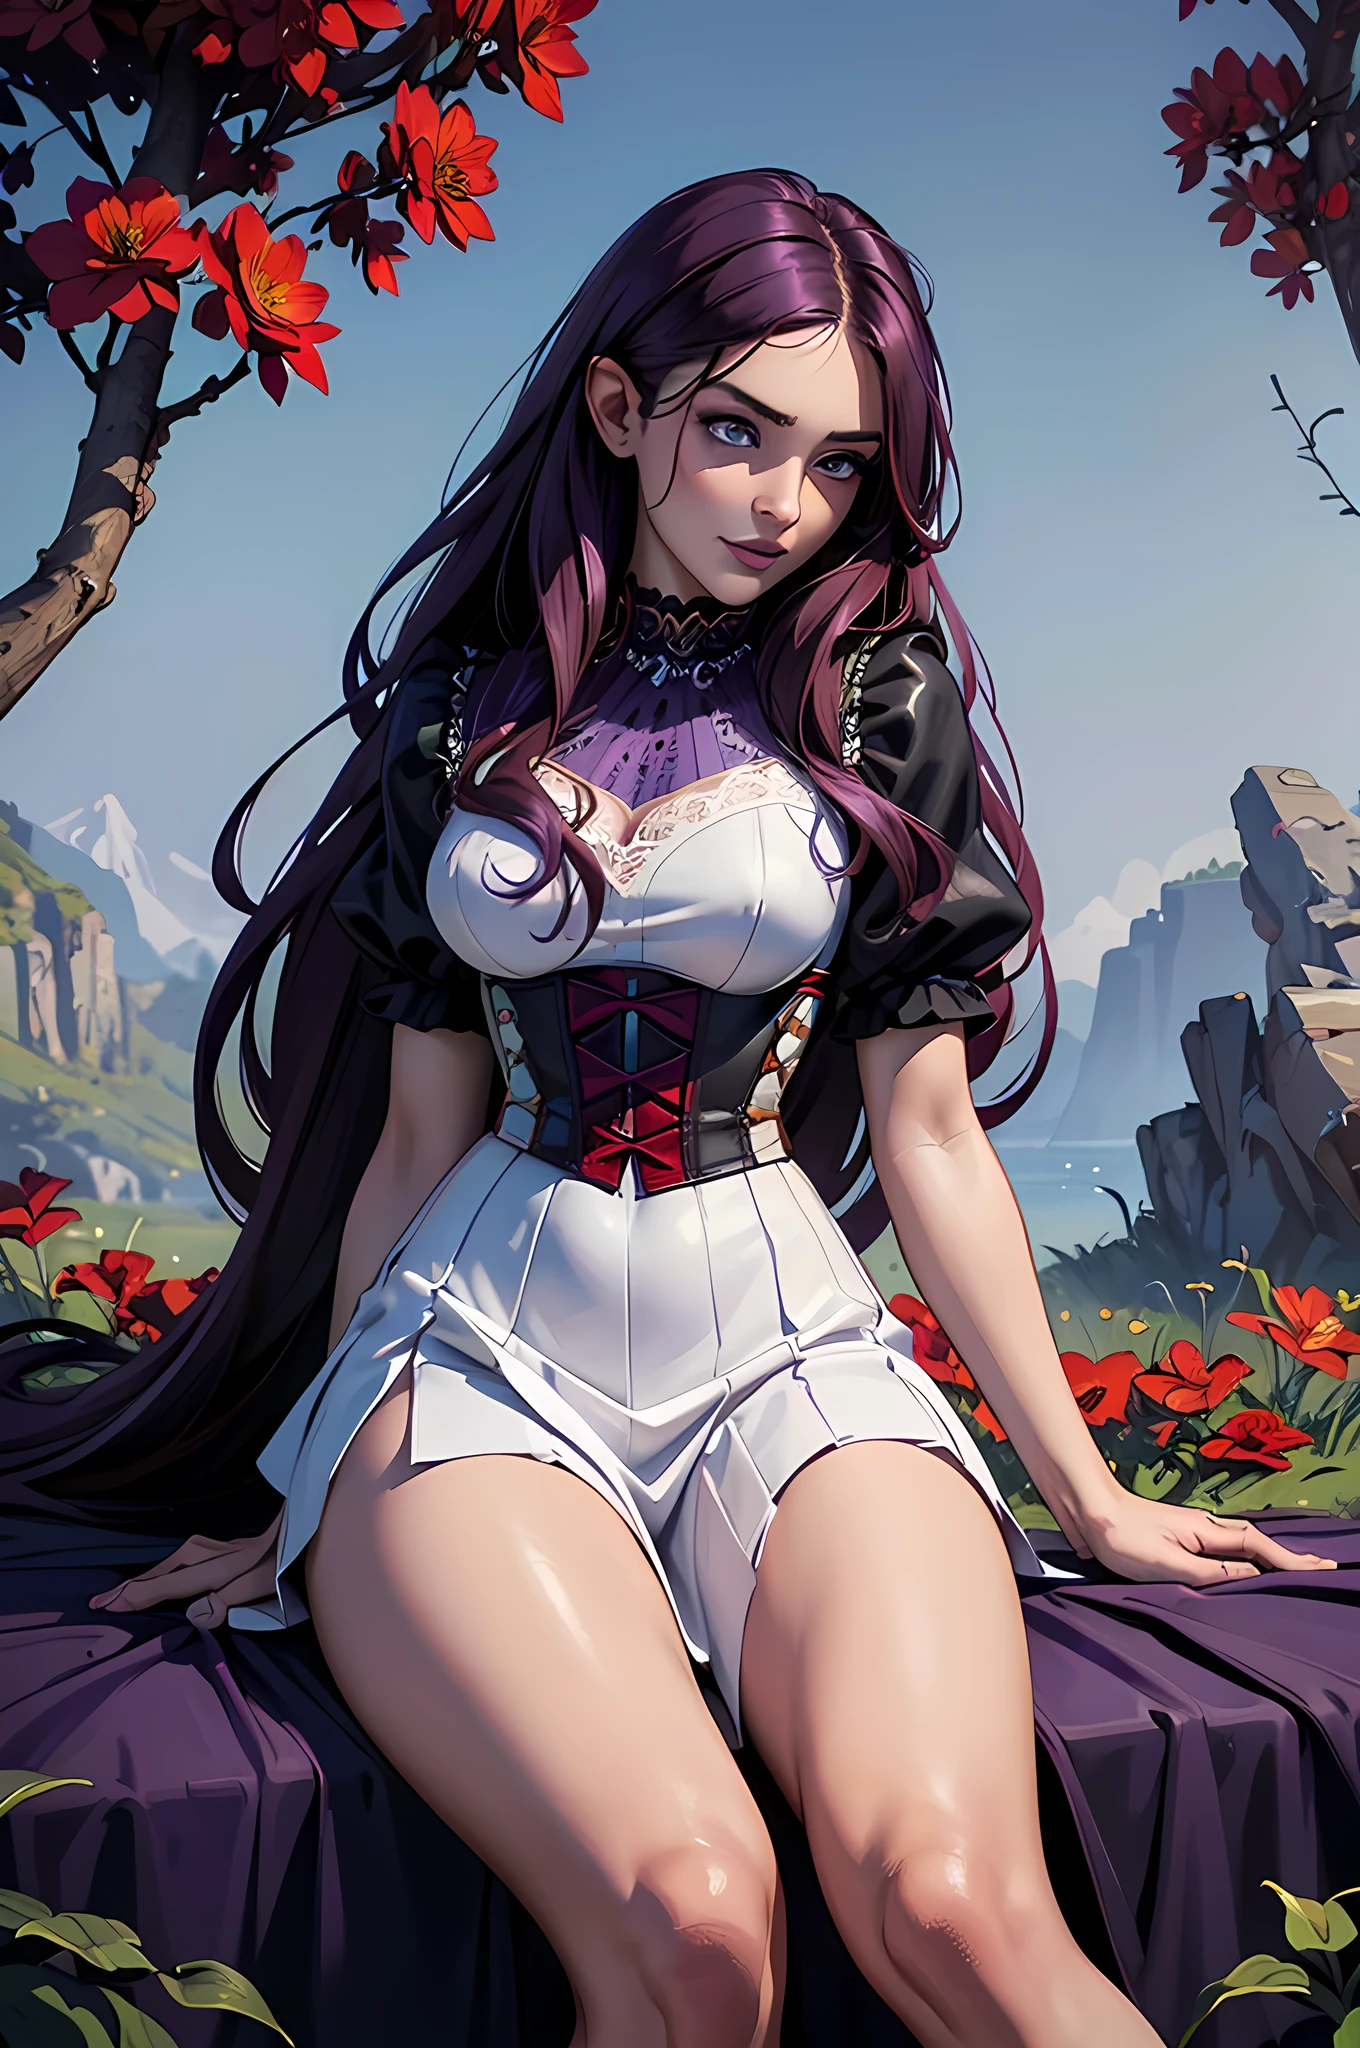 high details, best quality, 16k, RAW, [best detailed], masterpiece, best quality, (extremely detailed), full body, ultra wide shot, photorealistic, dark fantasy art, goth art, RPG art, D&D art, a picture of a dark female fairy resting in a flower meadow, extremely beautiful fairy, ultra feminine (intense details, Masterpiece, best quality), best detailed face (intense details, Masterpiece, best quality), having wide butterfly wings butterfly_wings, spread butterfly wings (intense details, Masterpiece, best quality: 1.3), (purple: 1.5) colors wings (intense details, Masterpiece, best quality), (dark red) hair, long hair, shinning hair, flowing hair, shy smile, innocent smile, (blue: 1.3) eyes, dark blue lips, wearing (white: 1.3) dress latex corset (intense details, Masterpiece, best quality), dynamic elegant shirt, chocker, wearing (red: 1.3) high heels, in various shades of red colored flower meadow (intense details, Masterpiece, best quality), (red flowers: 1.2) , (black flowers: 1.2), (white flowers: 1.2), (blue flowers: 1.3) [extreme many flowers] (intense details, Masterpiece, best quality), dark colorful flowers (intense details, Masterpiece, best quality), flower meadow in a dark goth field background, night time, moon rising, dim light, cinematic light, High Detail, Ultra High Quality, High Resolution, 16K Resolution, Ultra HD Pictures, 3D rendering Ultra Realistic, Clear Details, Realistic Detail, Ultra High Definition, #chinese cloth, dungeons and dragons, DonMDr4g0nXL